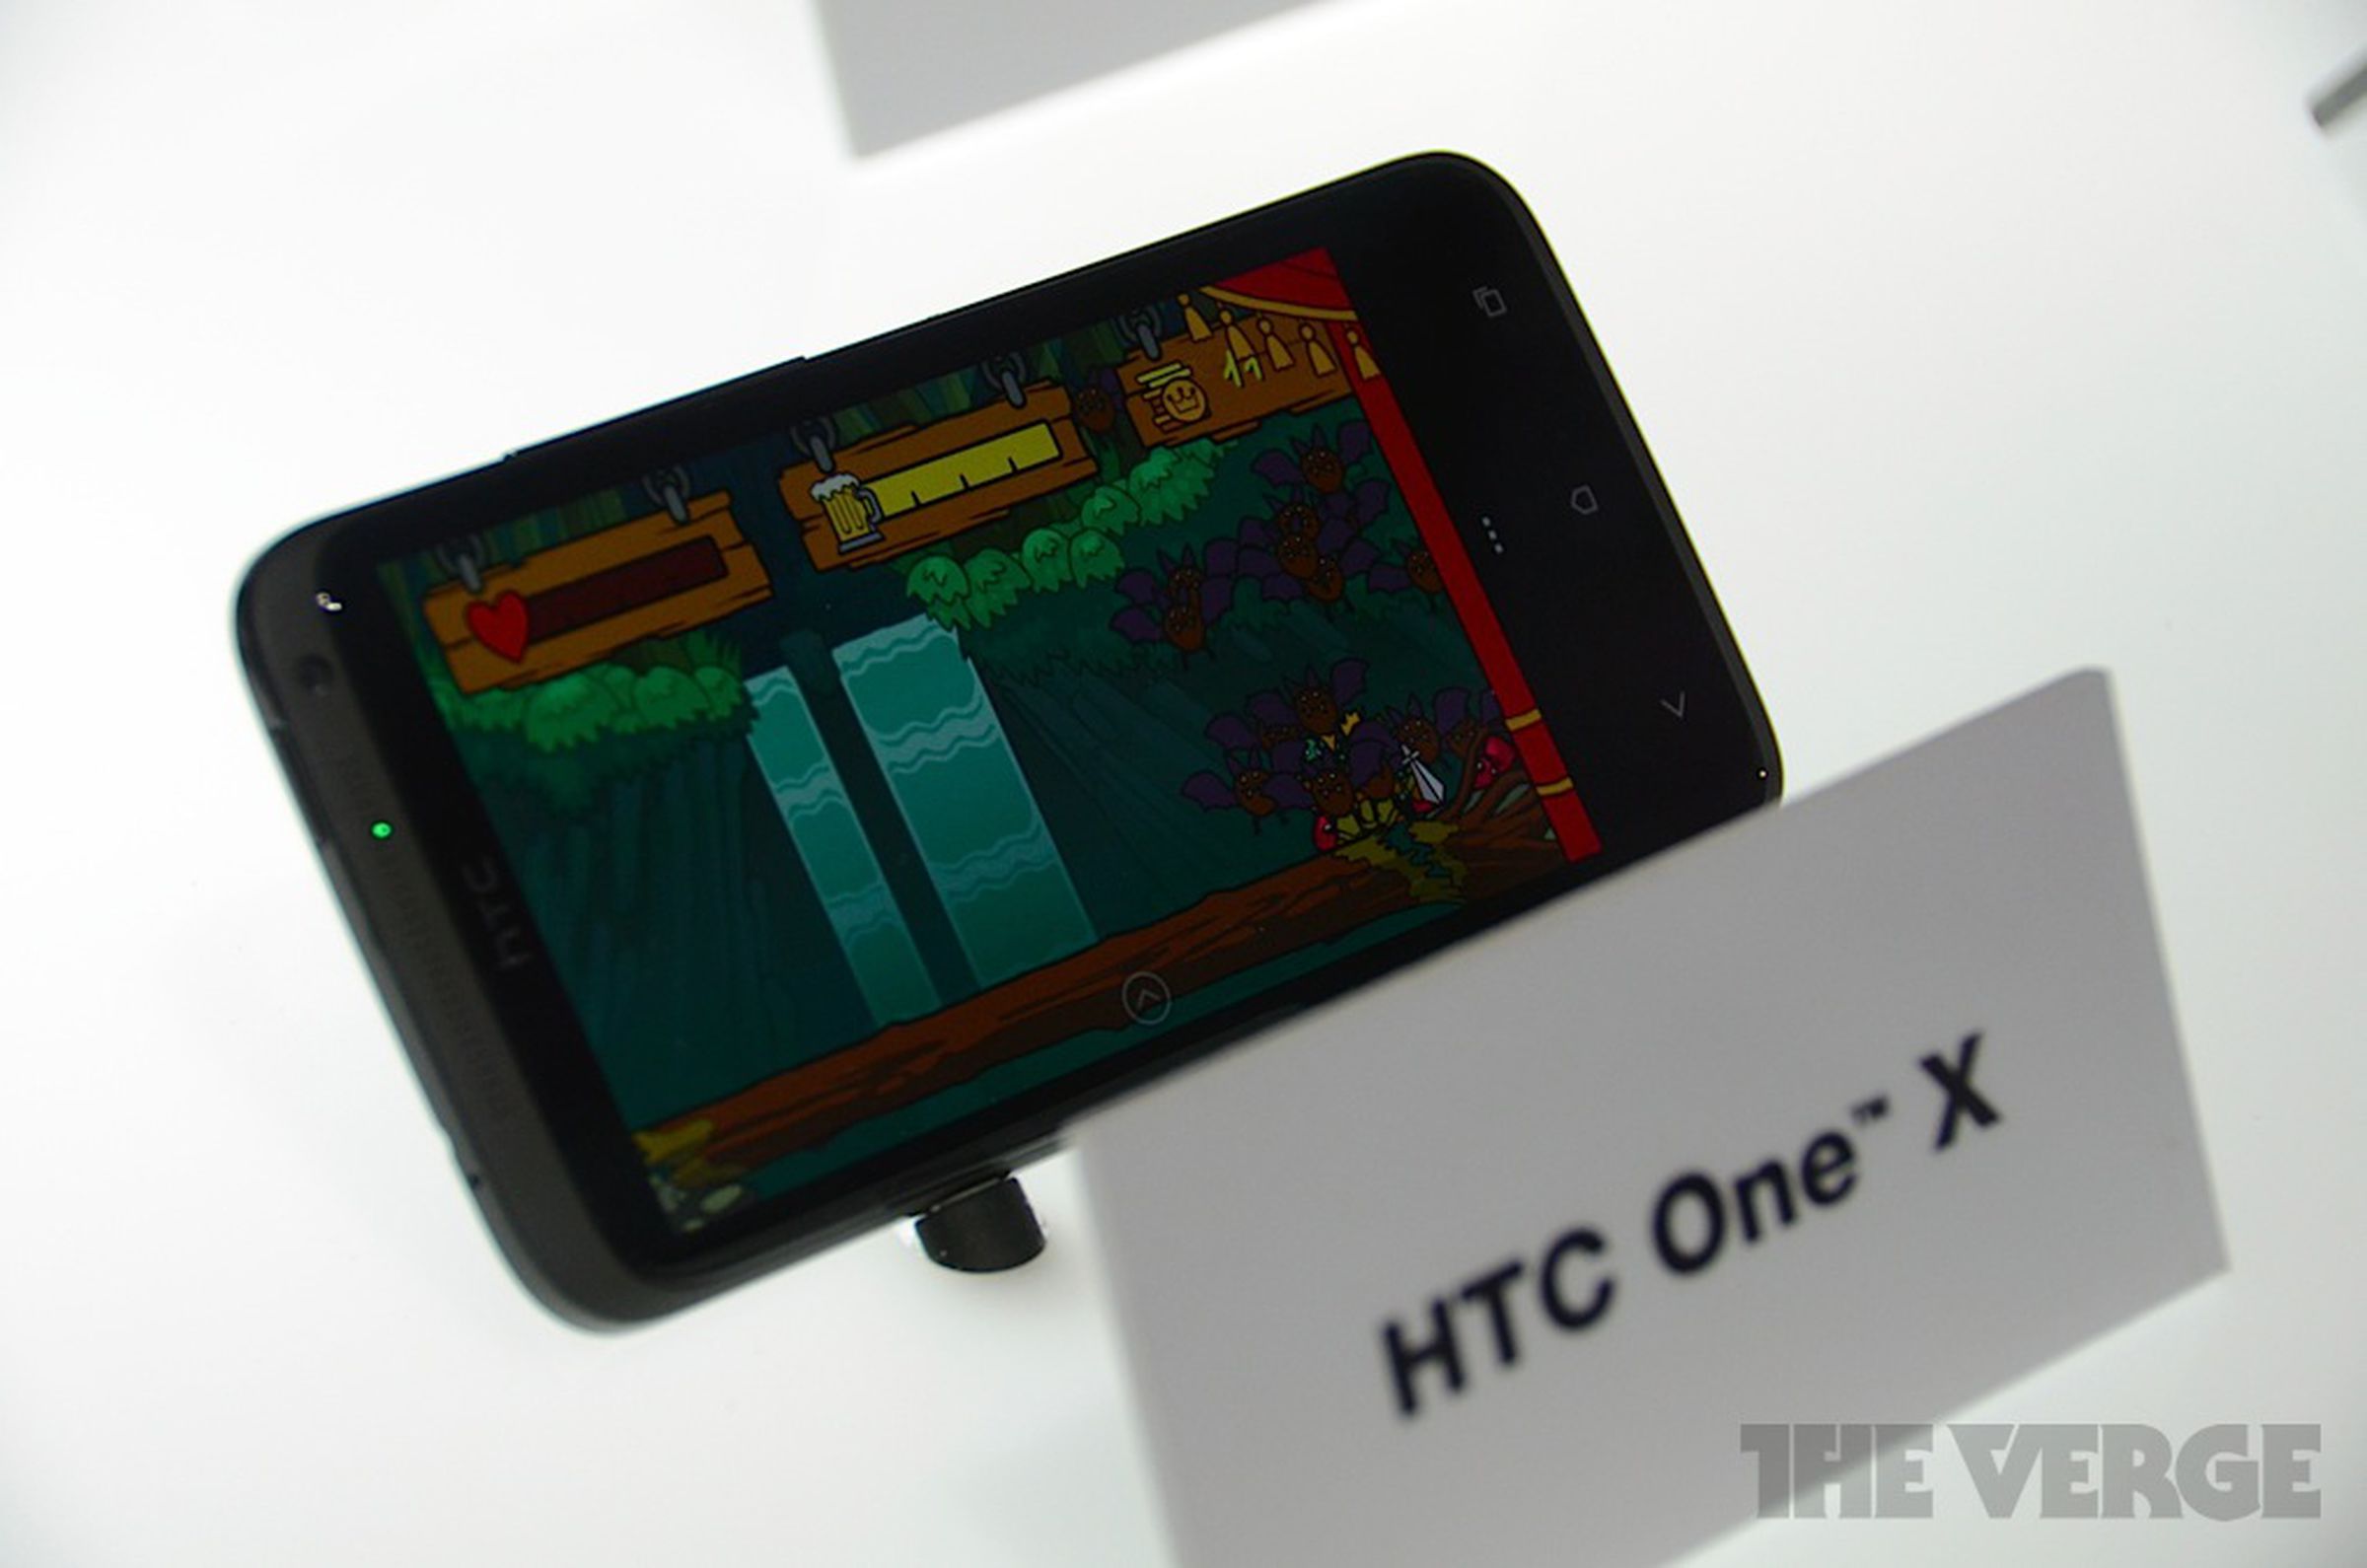 HTC One series with PlayStation Mobile